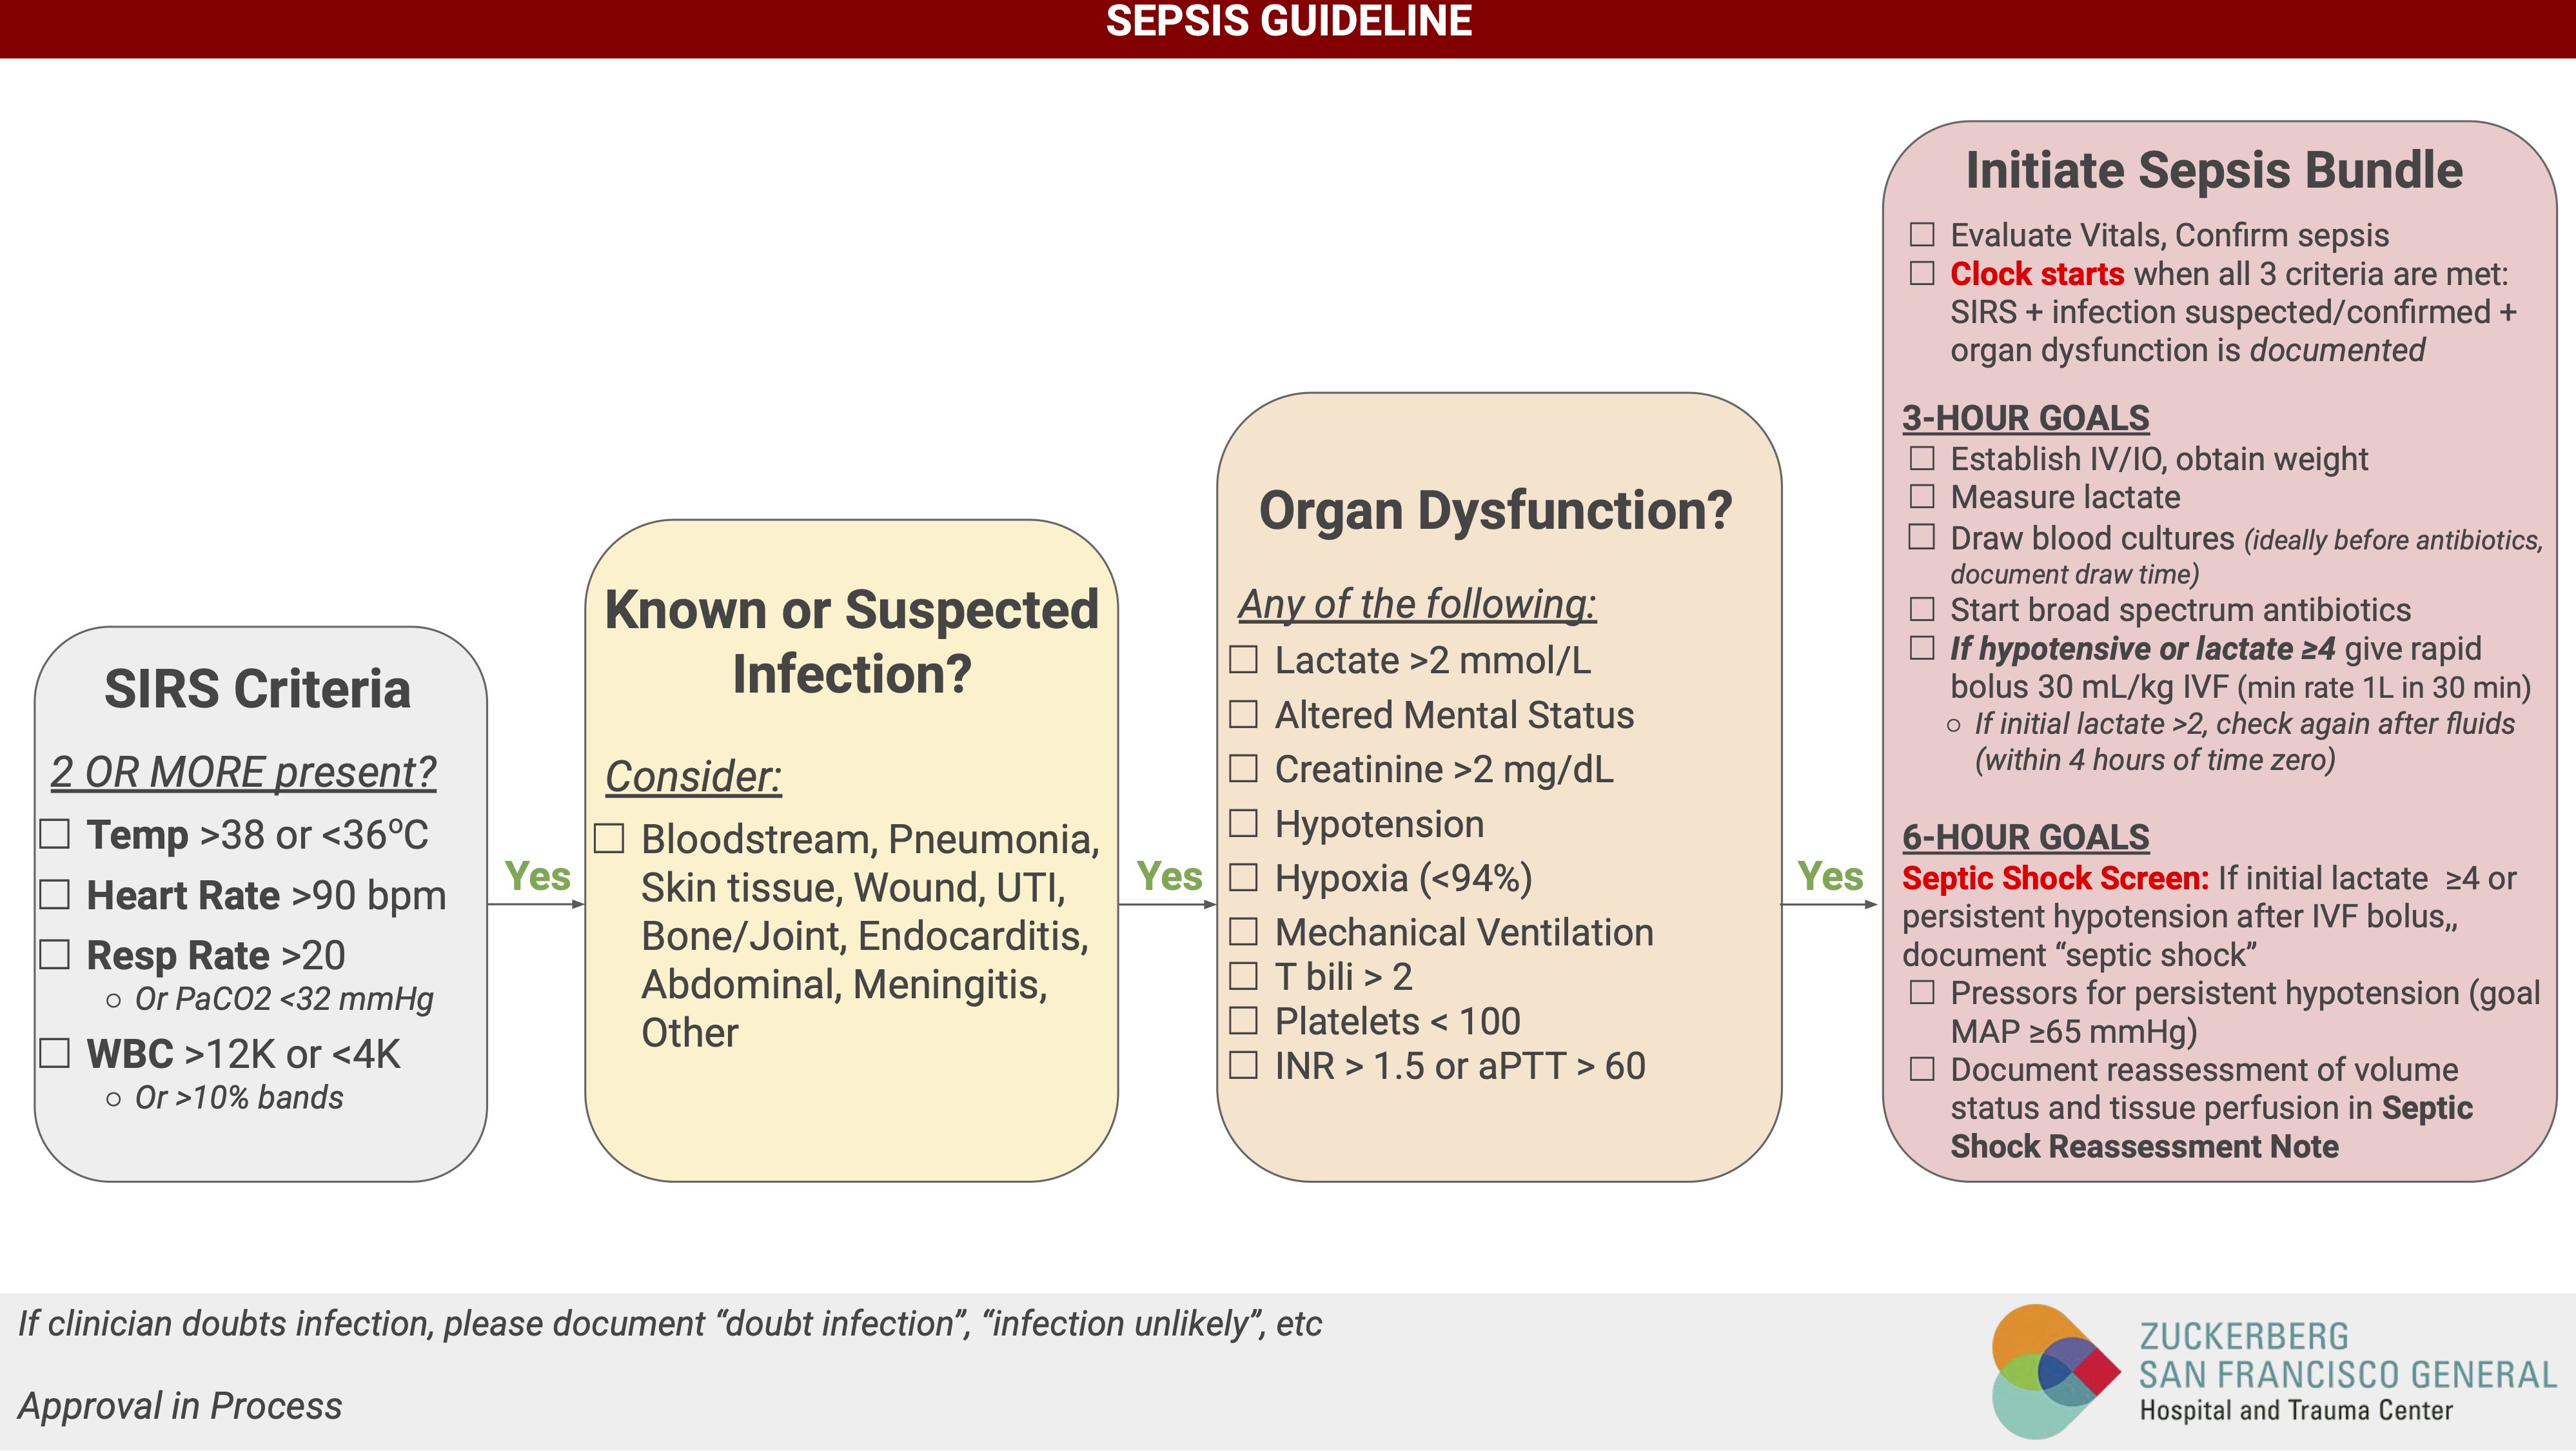 Sepsis Guidelines UCSF